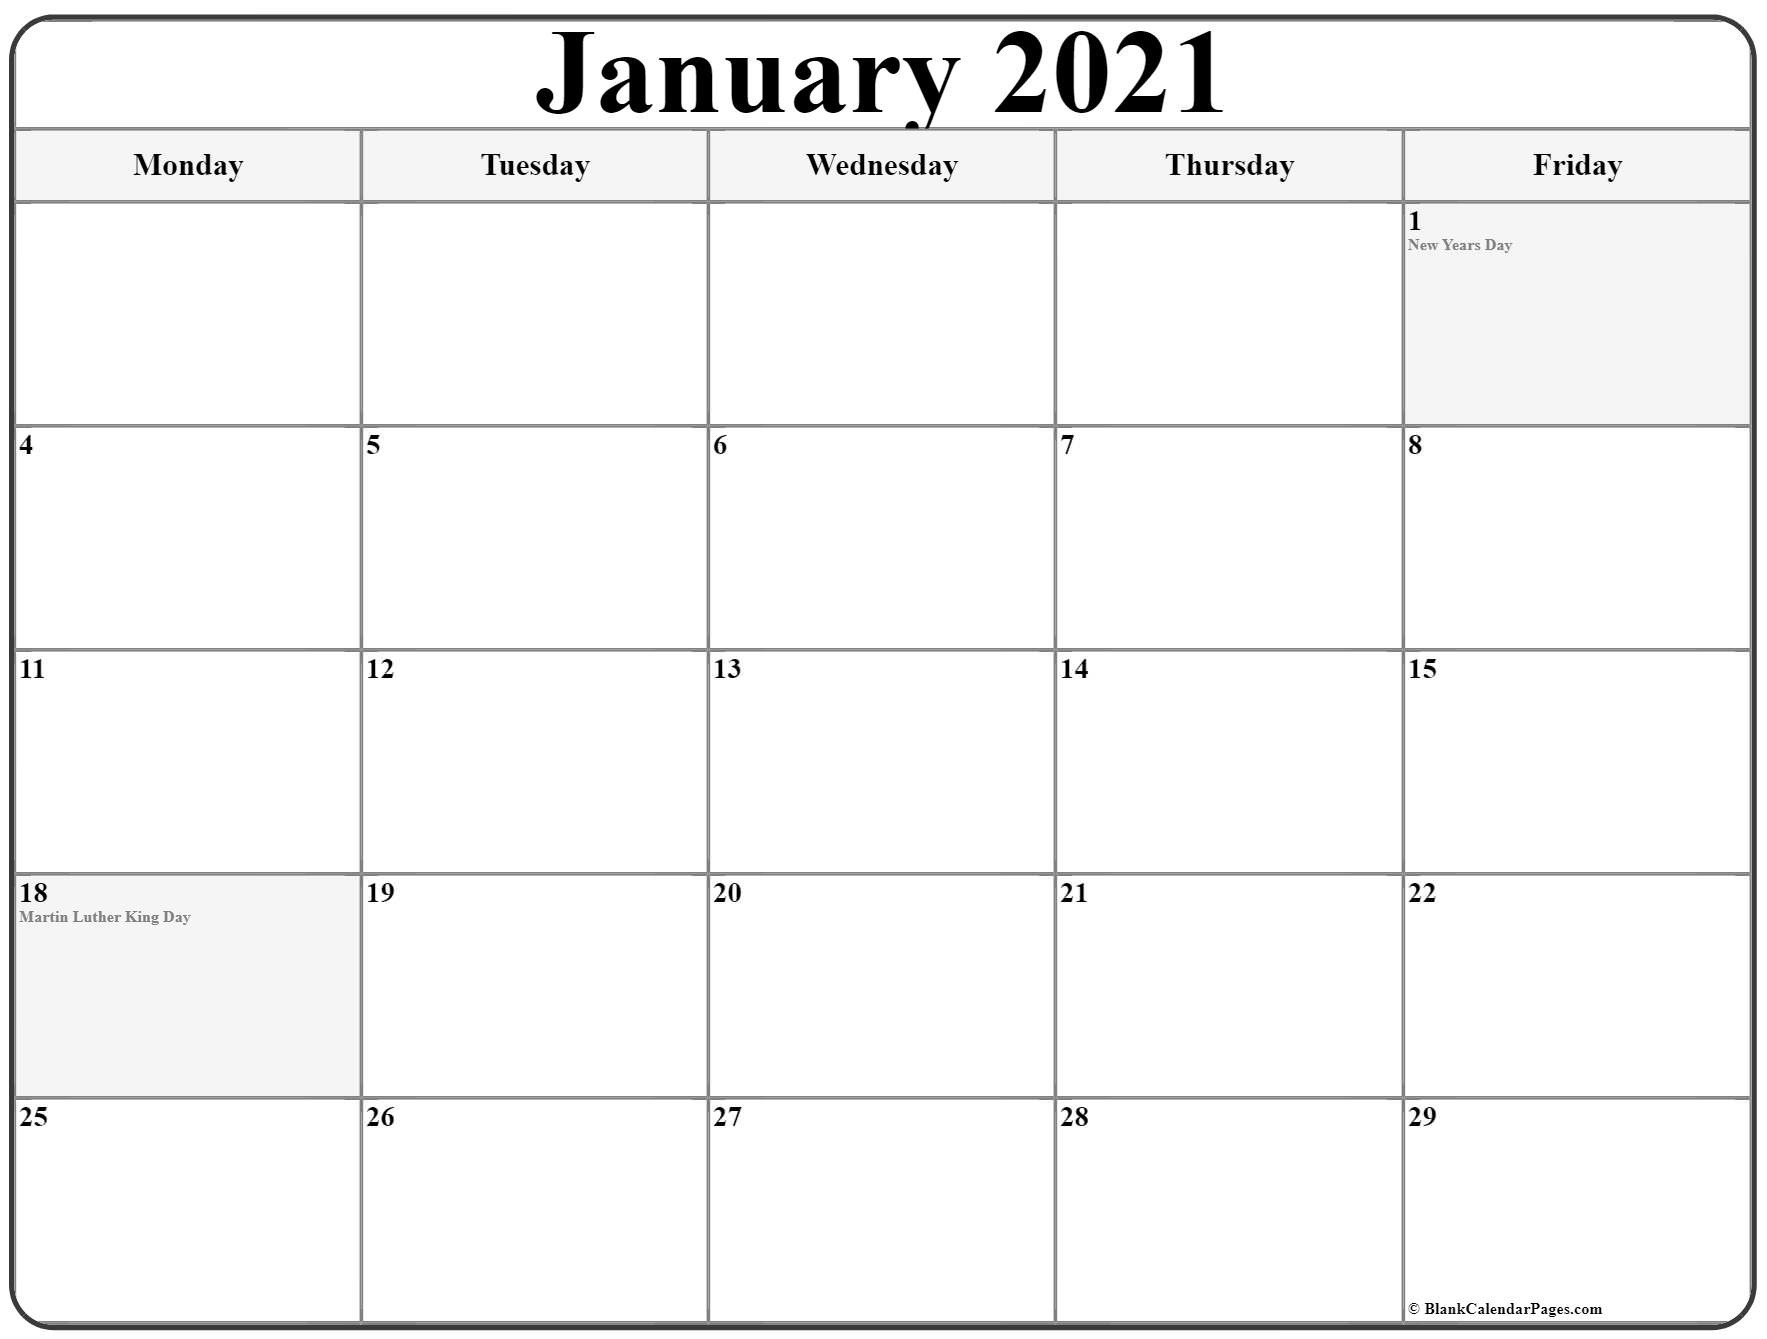 January 2021 Monday Calendar | Monday To Sunday-Blank Monday Through Friday Schedule For 2021